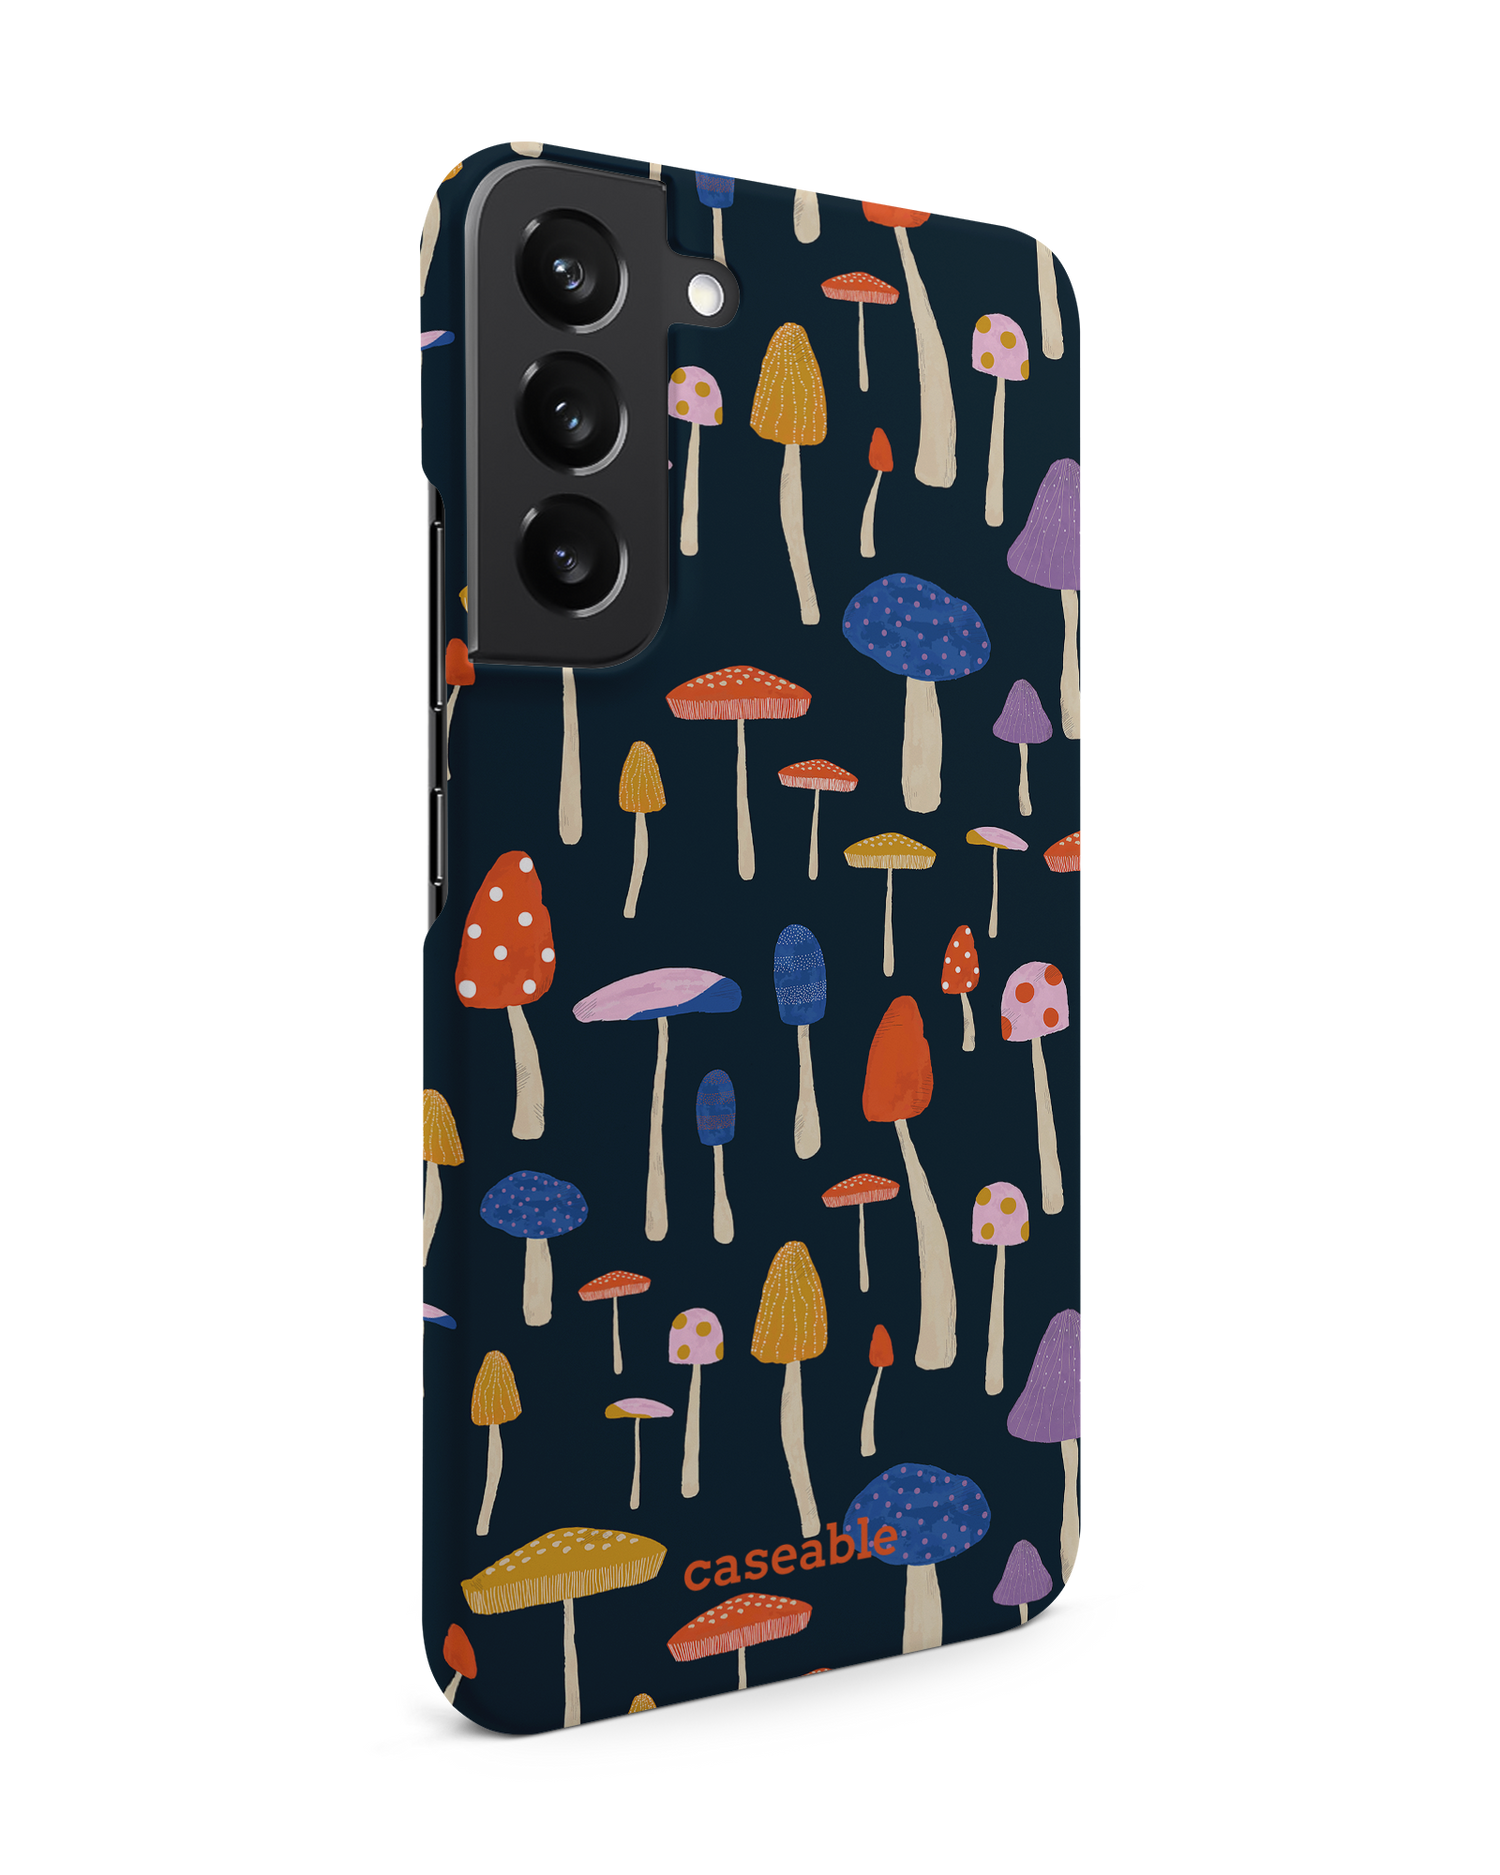 Mushroom Delights Hard Shell Phone Case Samsung Galaxy S22 Plus 5G: View from the left side